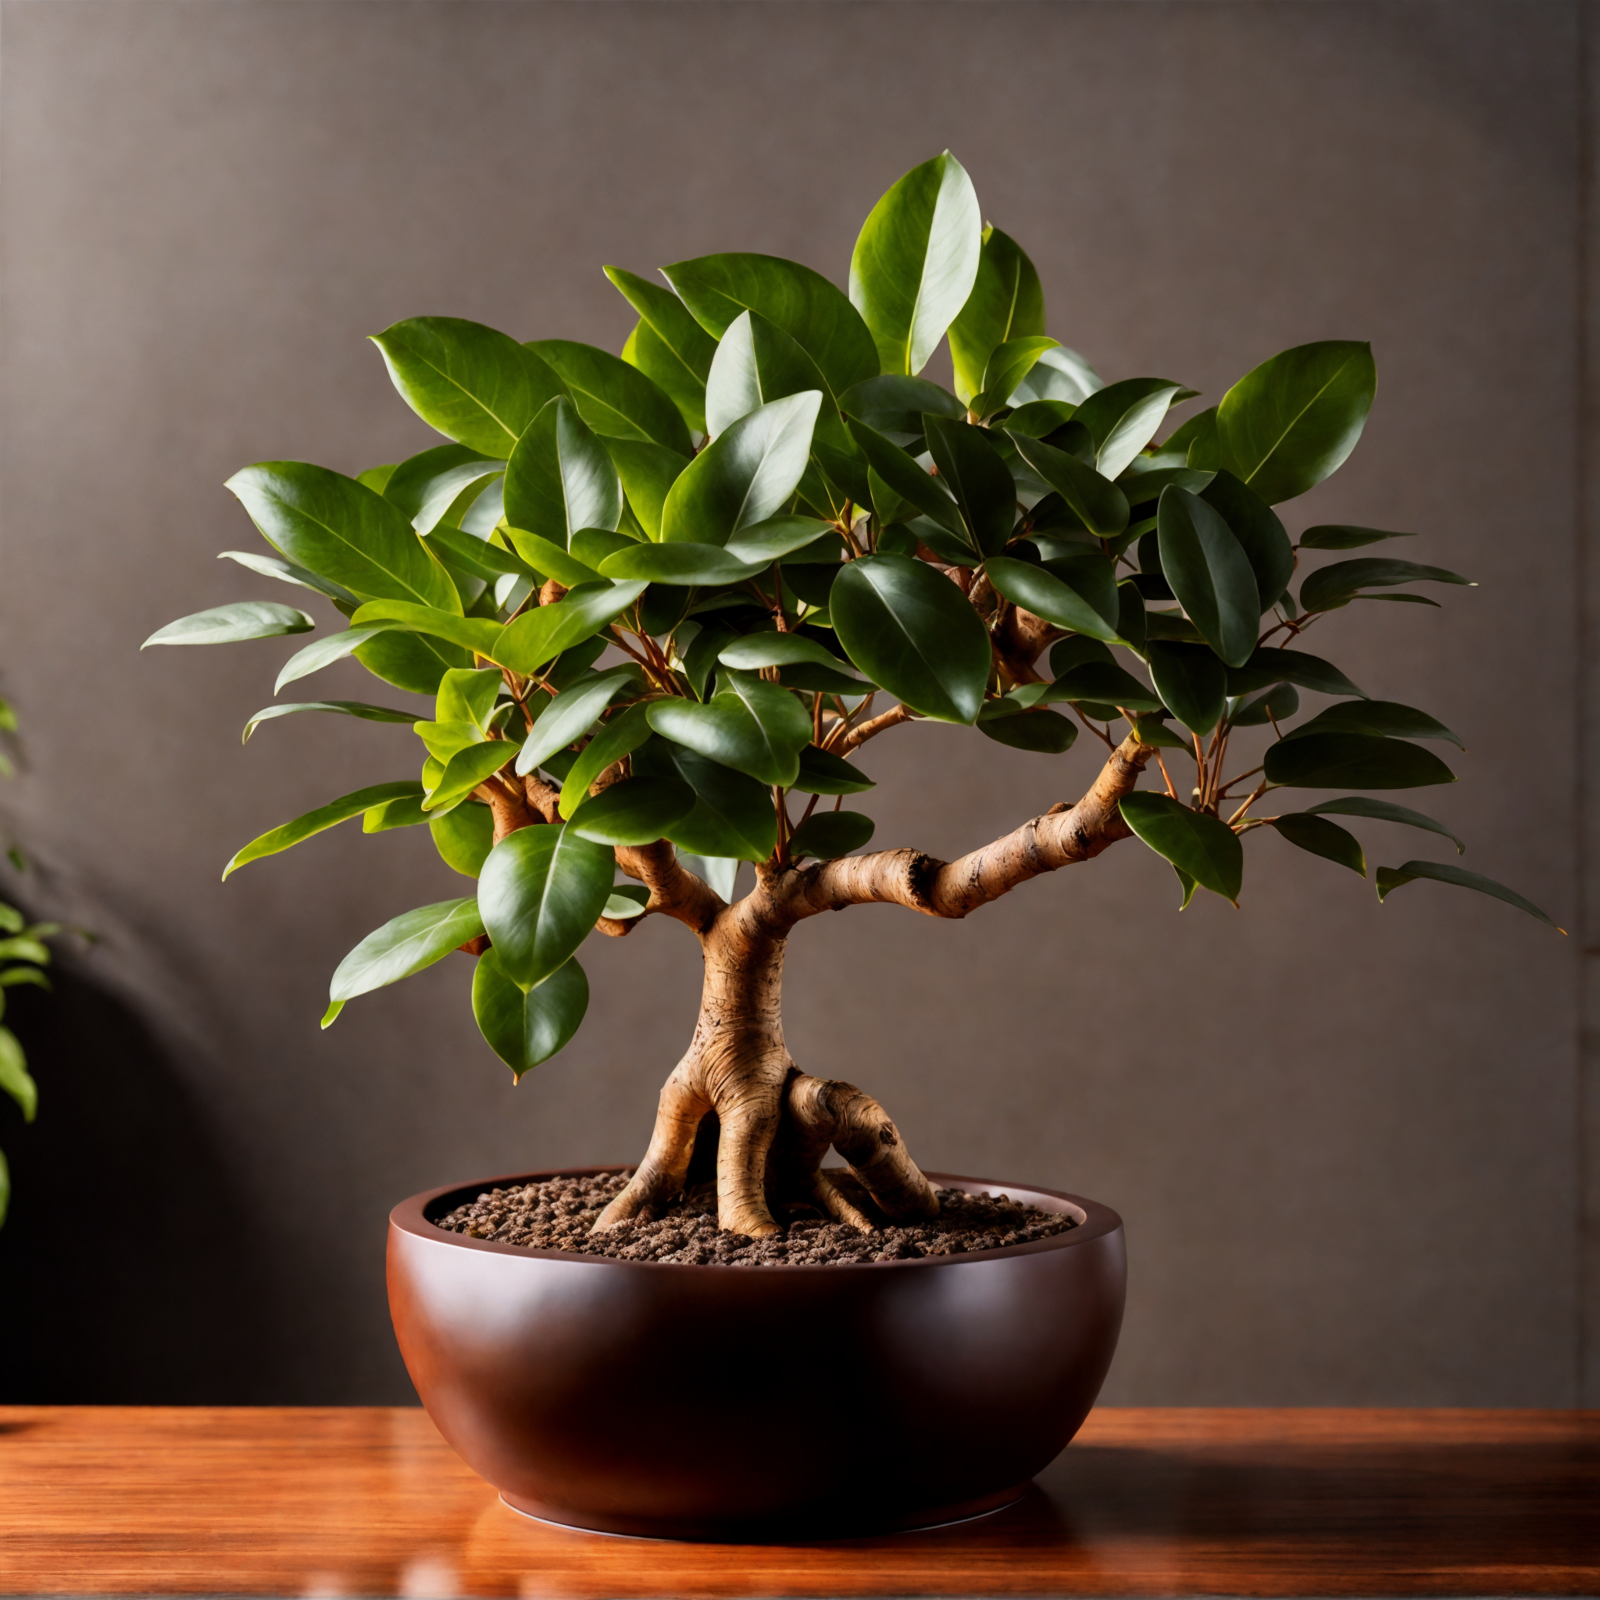 Ficus microcarpa in a brown bowl on a wooden table, with clear lighting and a dark background.